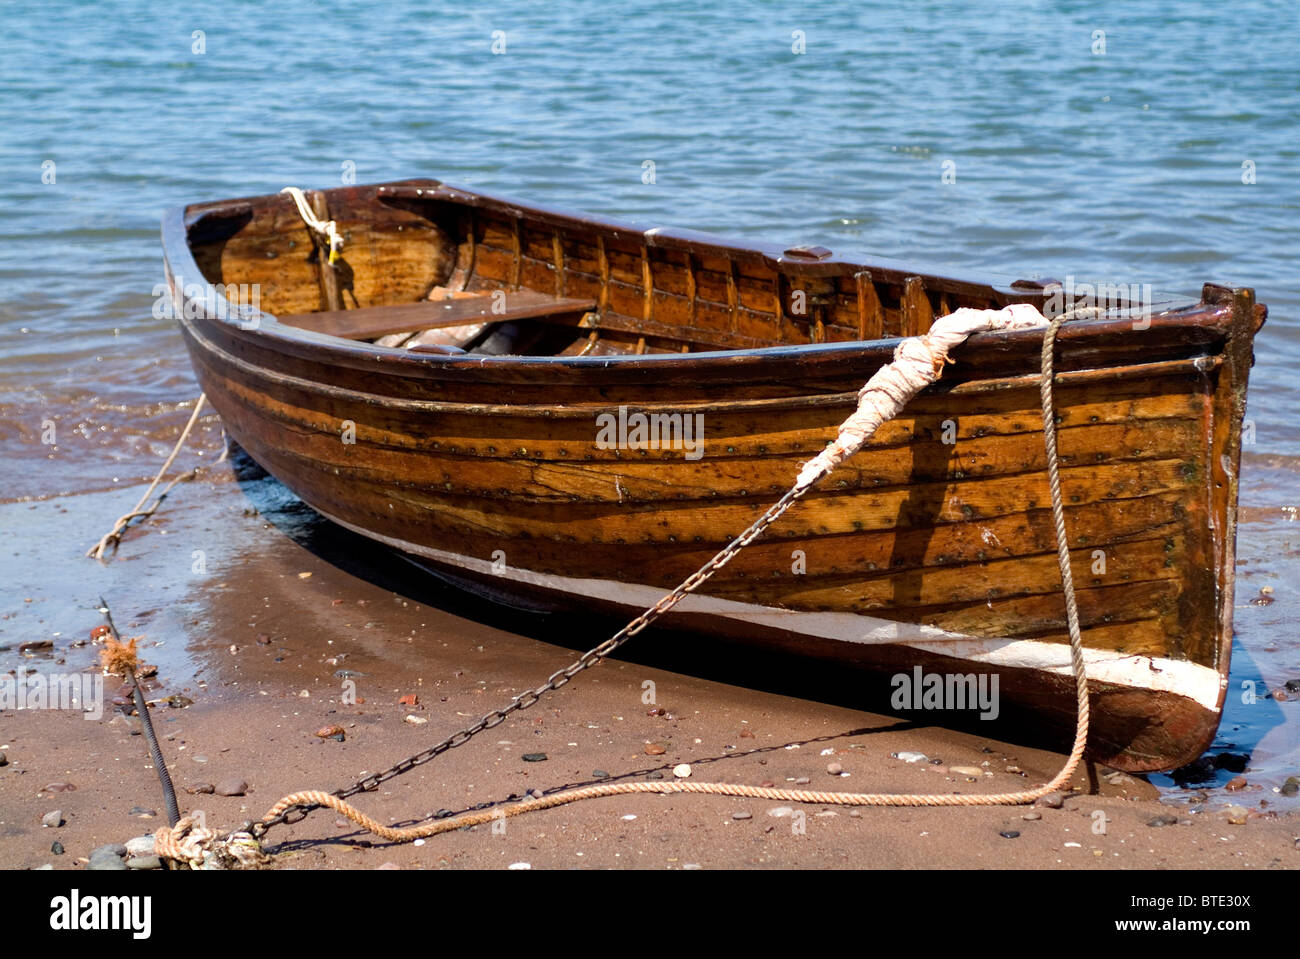 old wooden rowing boat on beach stock photo: 32271818 - alamy